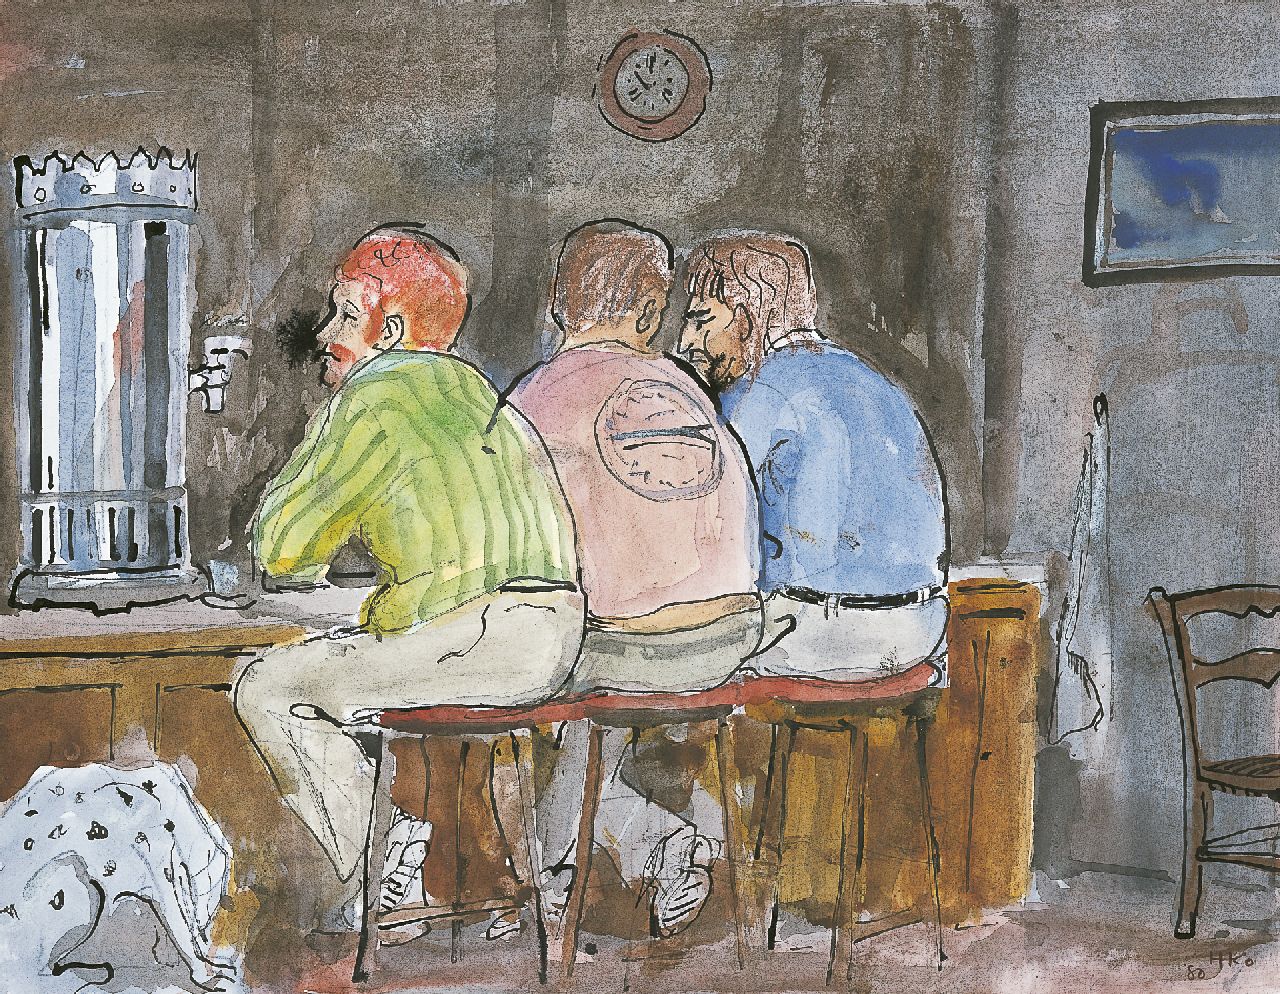 Kamerlingh Onnes H.H.  | 'Harm' Henrick Kamerlingh Onnes, Men in a pub, Indian ink and watercolour on paper 23.5 x 31.0 cm, signed l.r. with monogram and dated '80